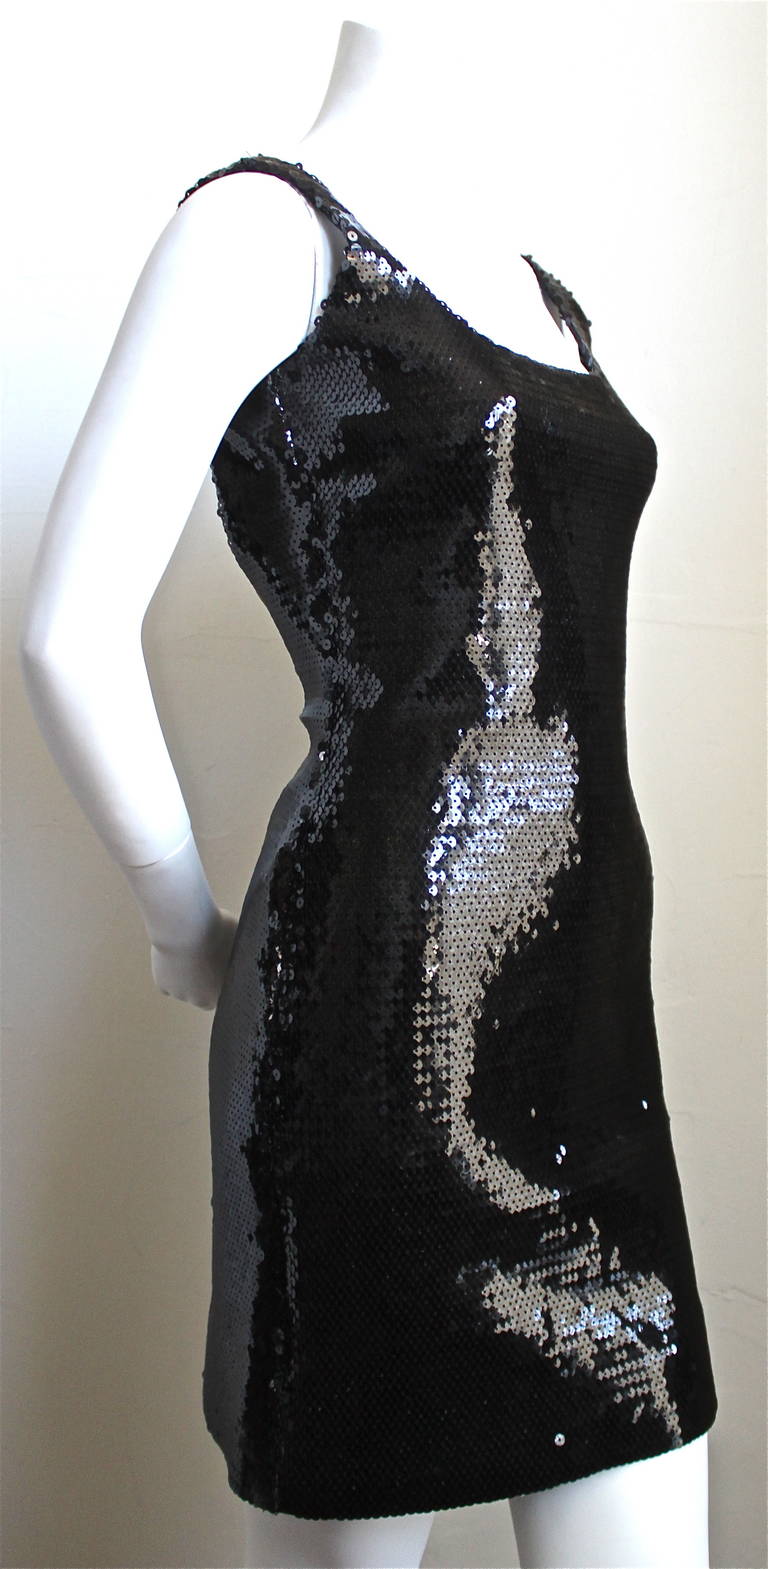 Very rare jet black sequined mini dress from Stephen Sprouse dating to the 1980's. Labeled a US size 6. Approximate measurements: bust 32.5